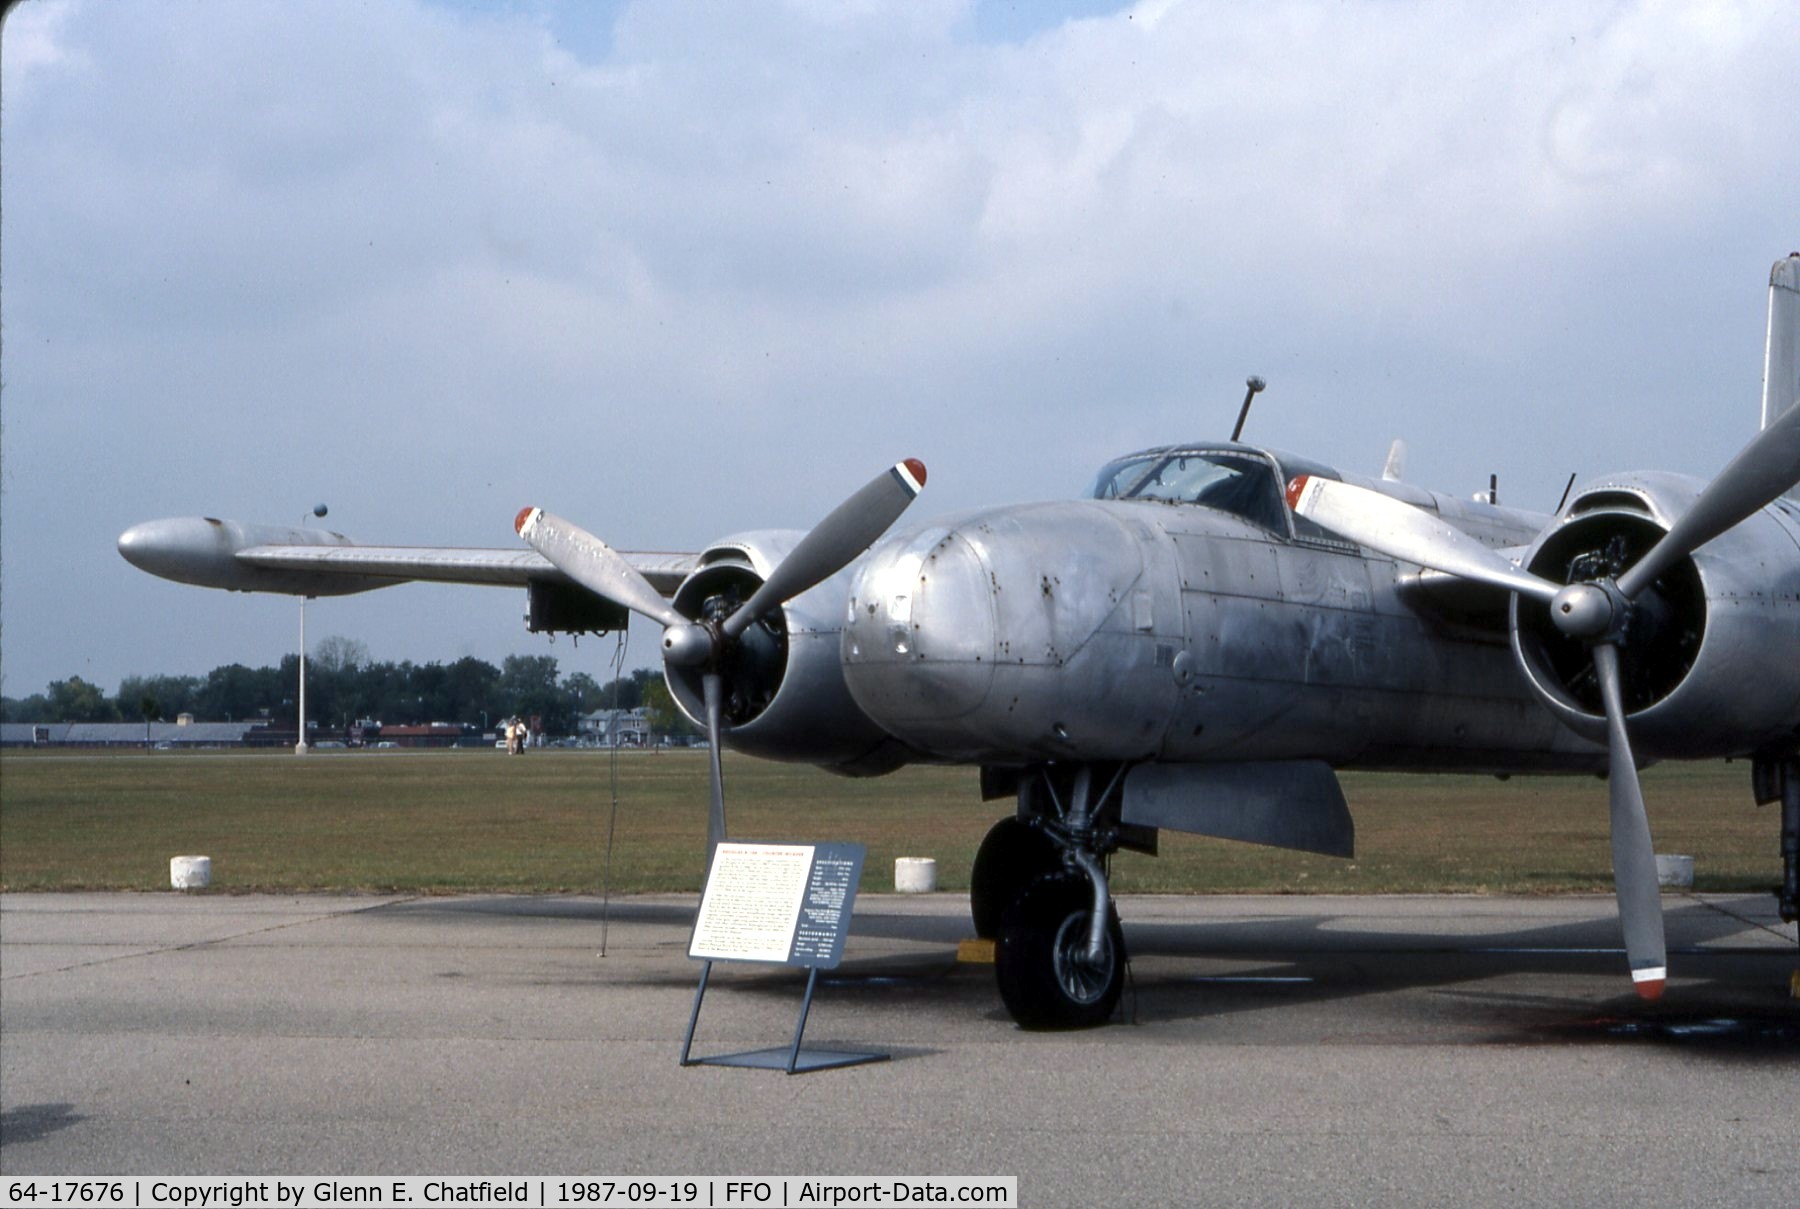 64-17676, 1971 Douglas-On Mark B-26K Counter Invader C/N 7309 (was 41-39596), At the National Museum of the U.S. Air Force